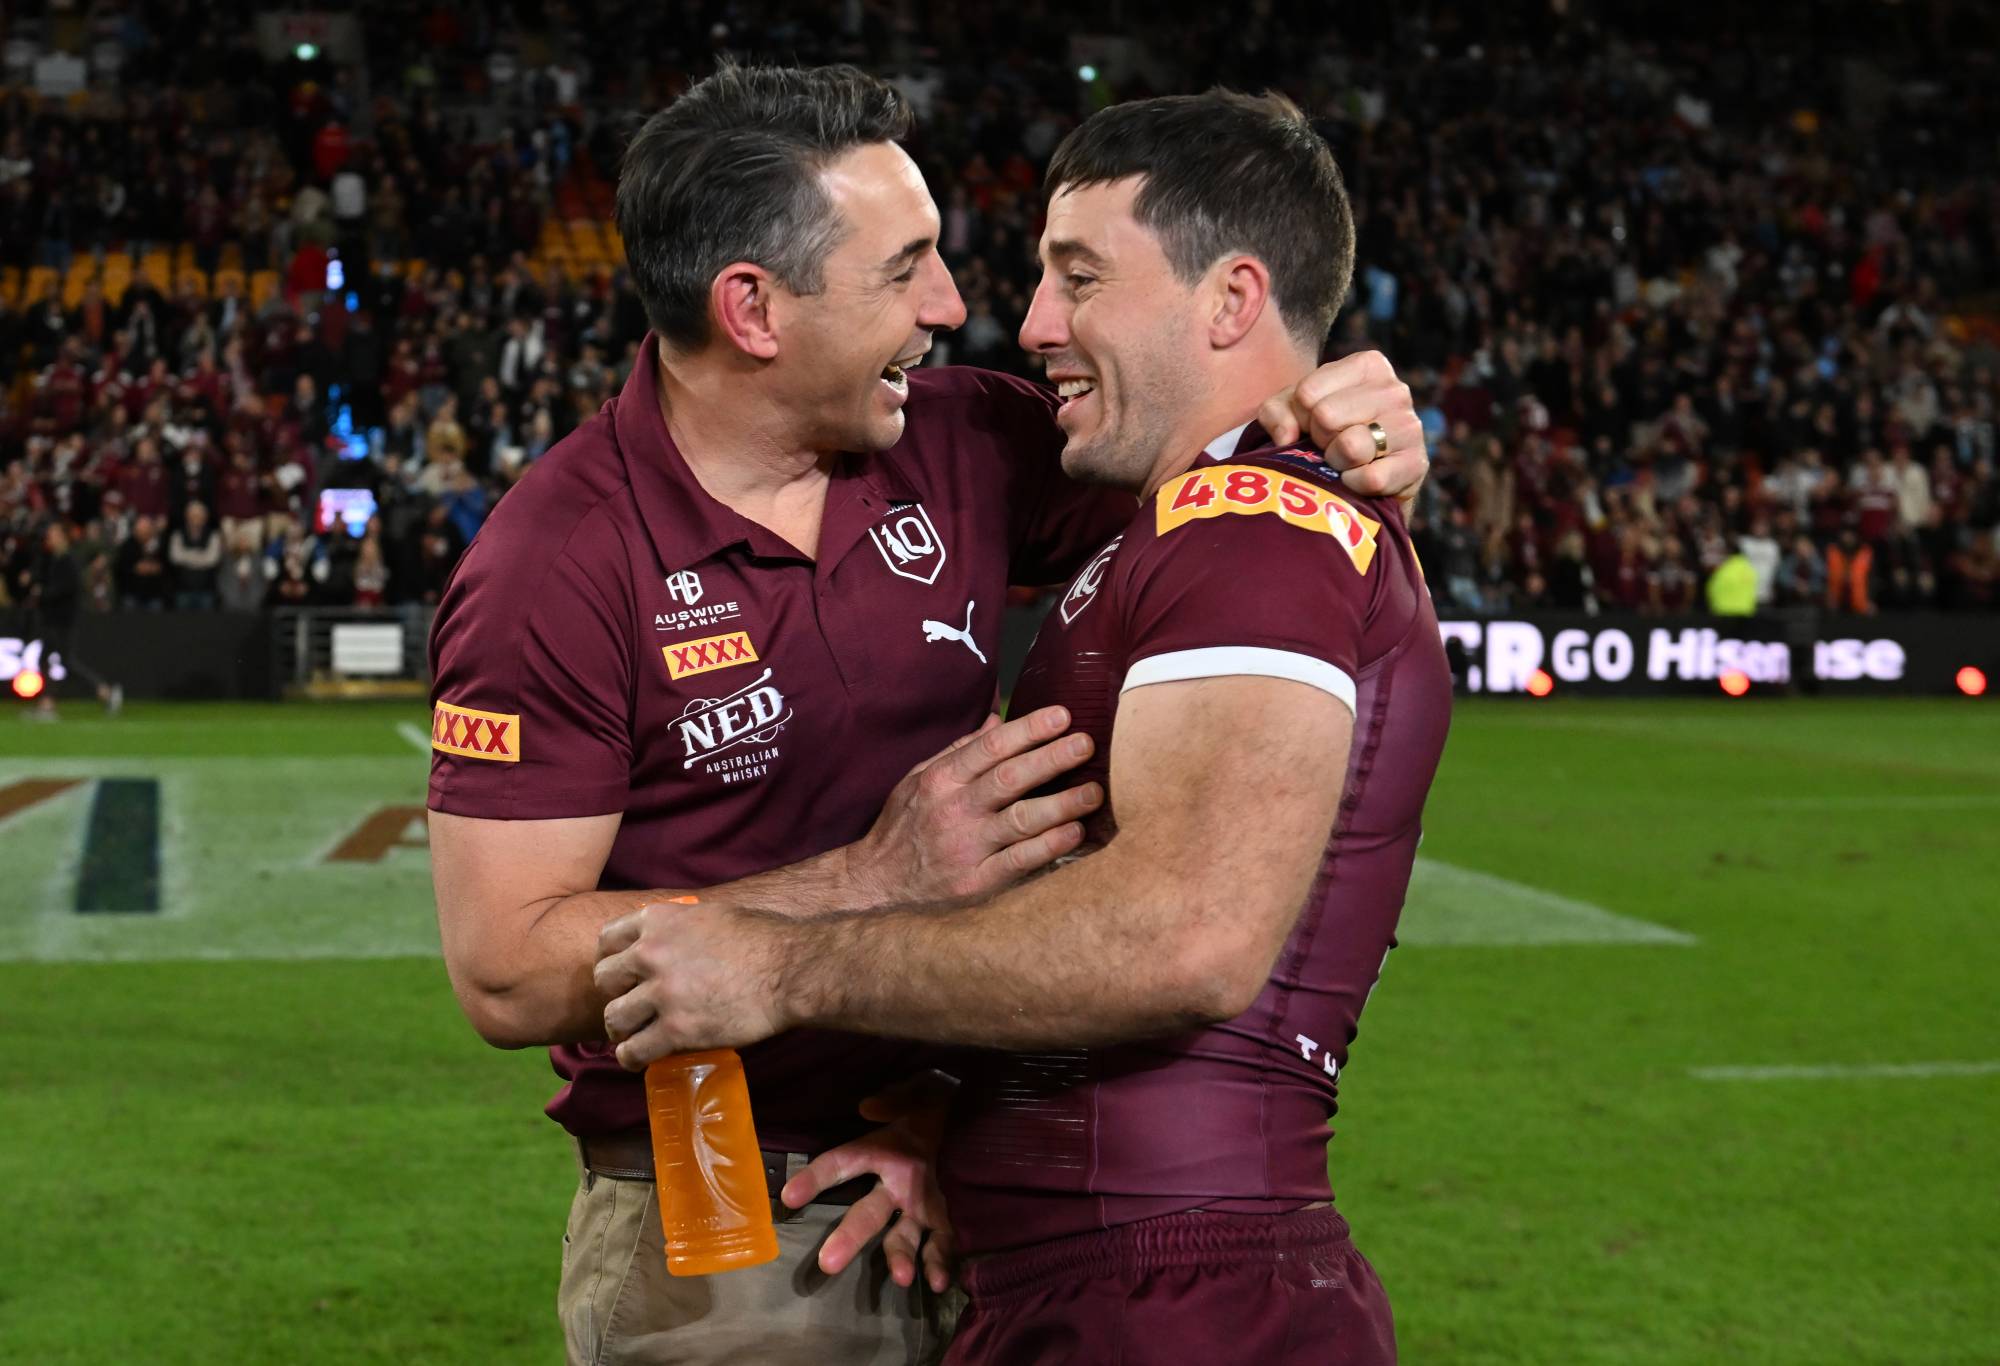 BRISBANE, AUSTRALIA - JULY 13: Billy Slater head coach of the Maroons and Ben Hunt of the Maroons celebrate victory during game three of the State of Origin Series between the Queensland Maroons and the New South Wales Blues at Suncorp Stadium on July 13, 2022 in Brisbane, Australia. (Photo by Bradley Kanaris/Getty Images)